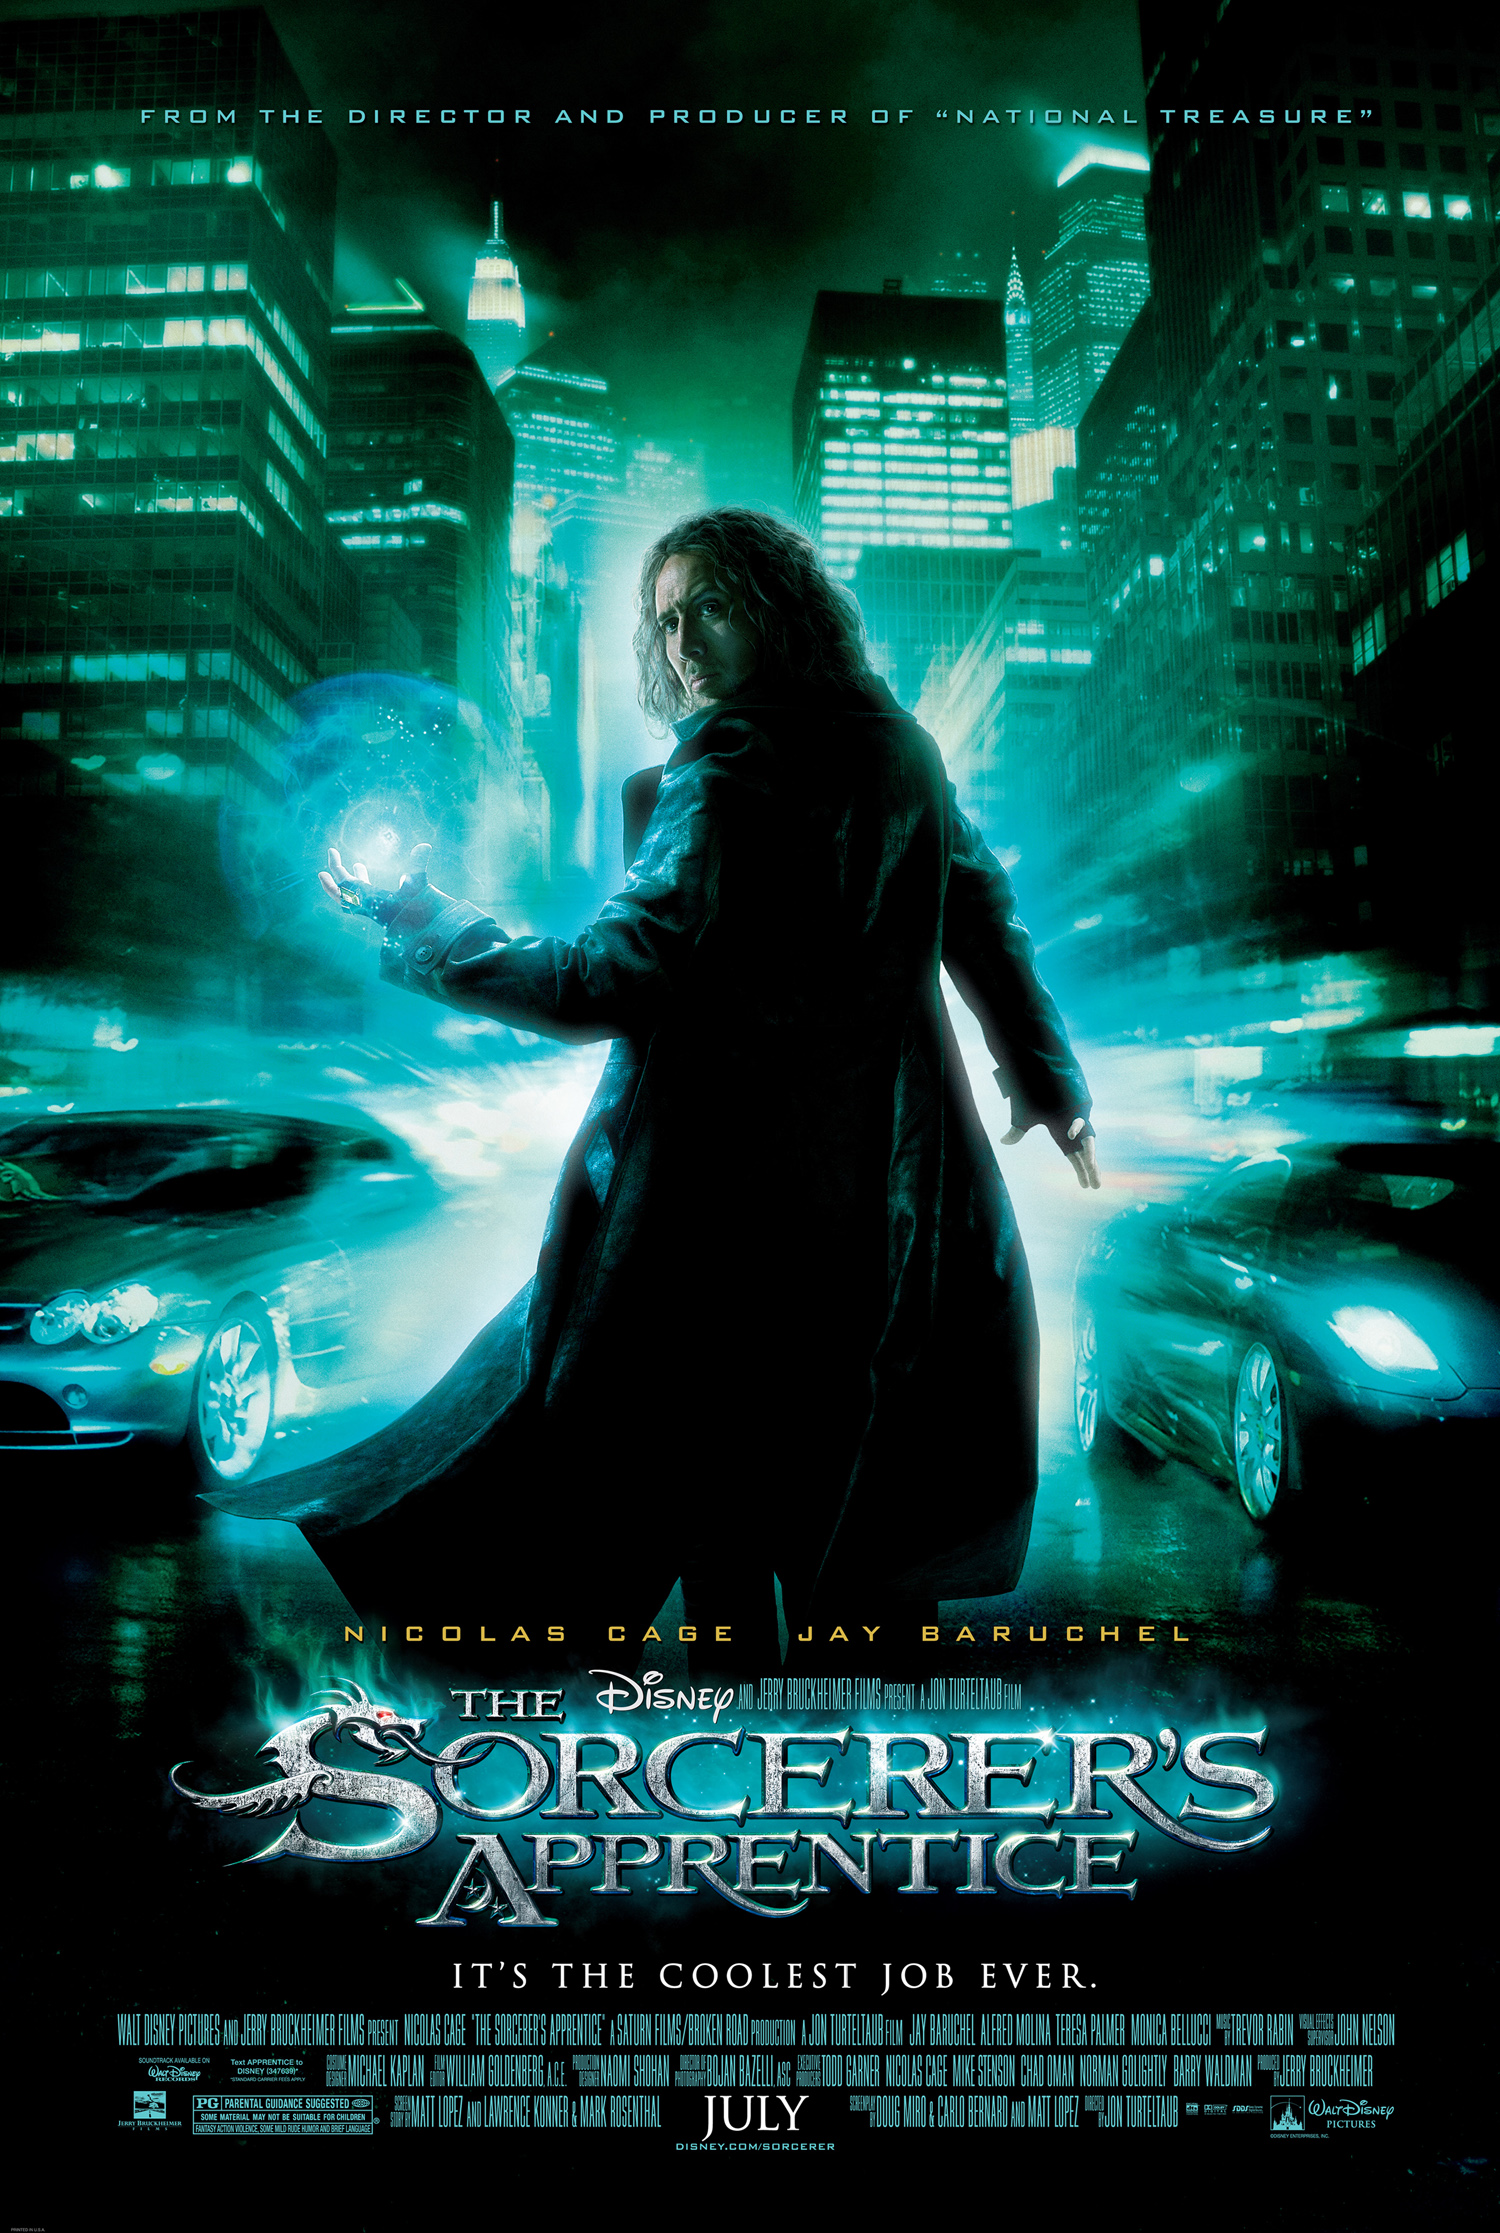 Brad Reviews The Sorcerers Apprentice Starring Nicolas Cage And Jay